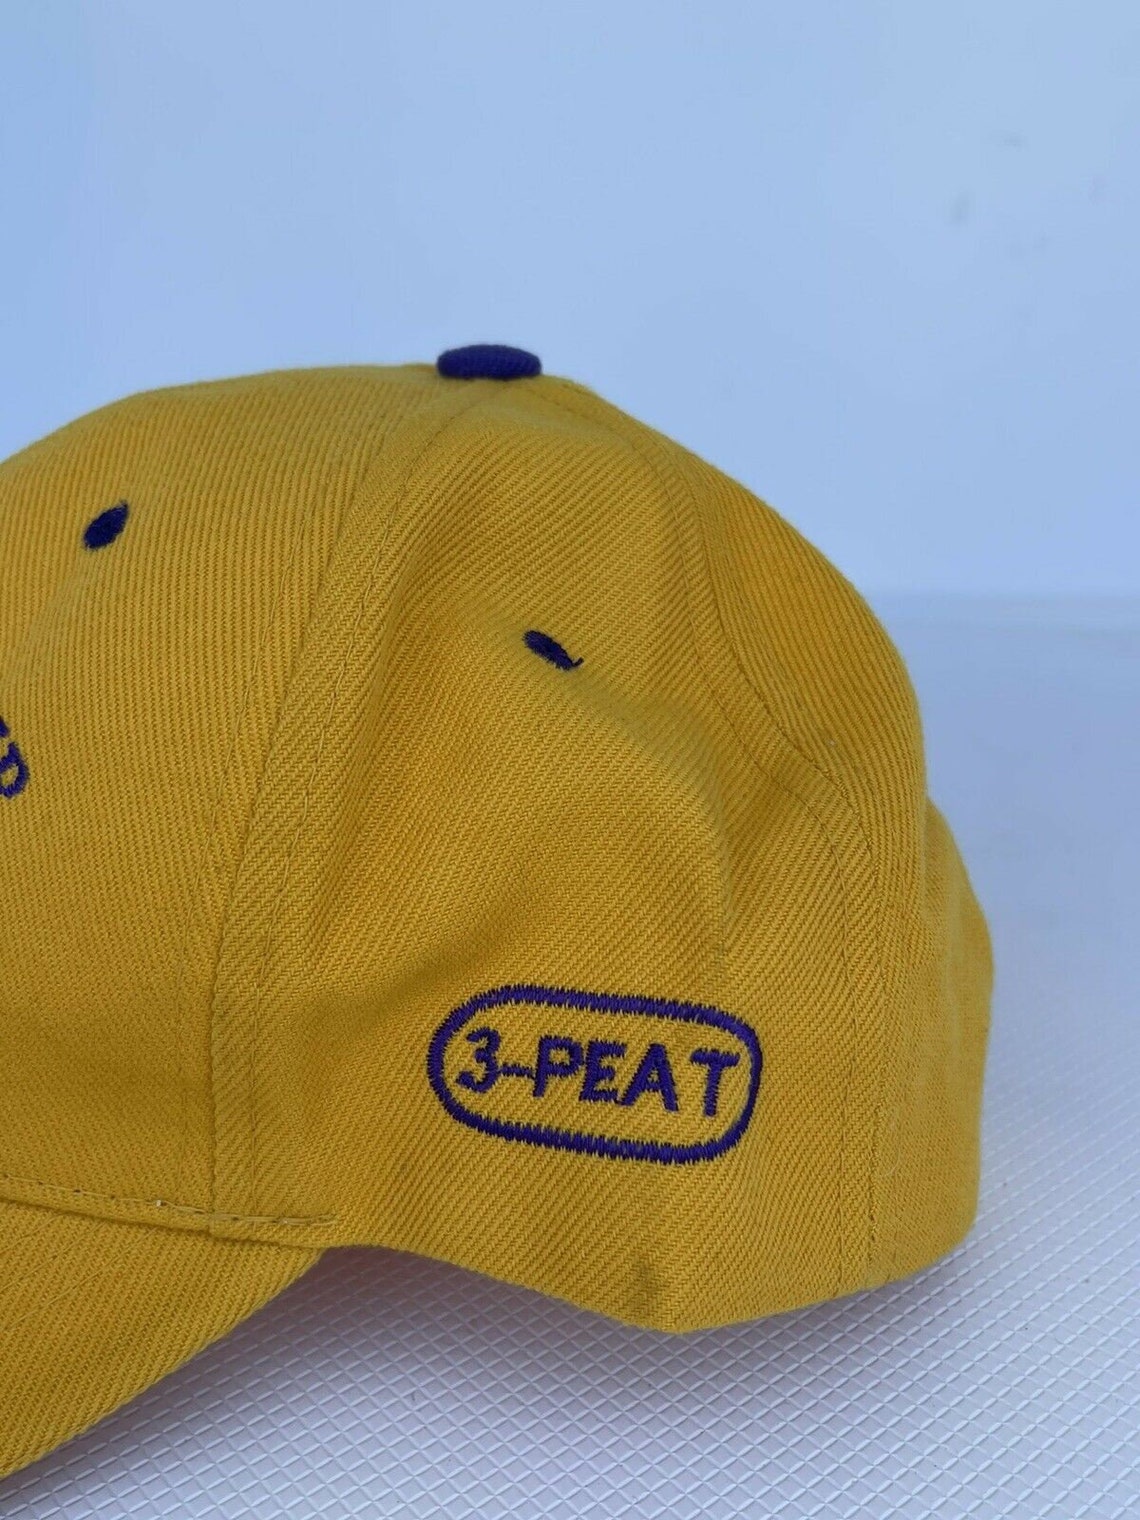 Los Angeles Lakers 3 Peat Championship Hat From 2002 B39 | Etsy